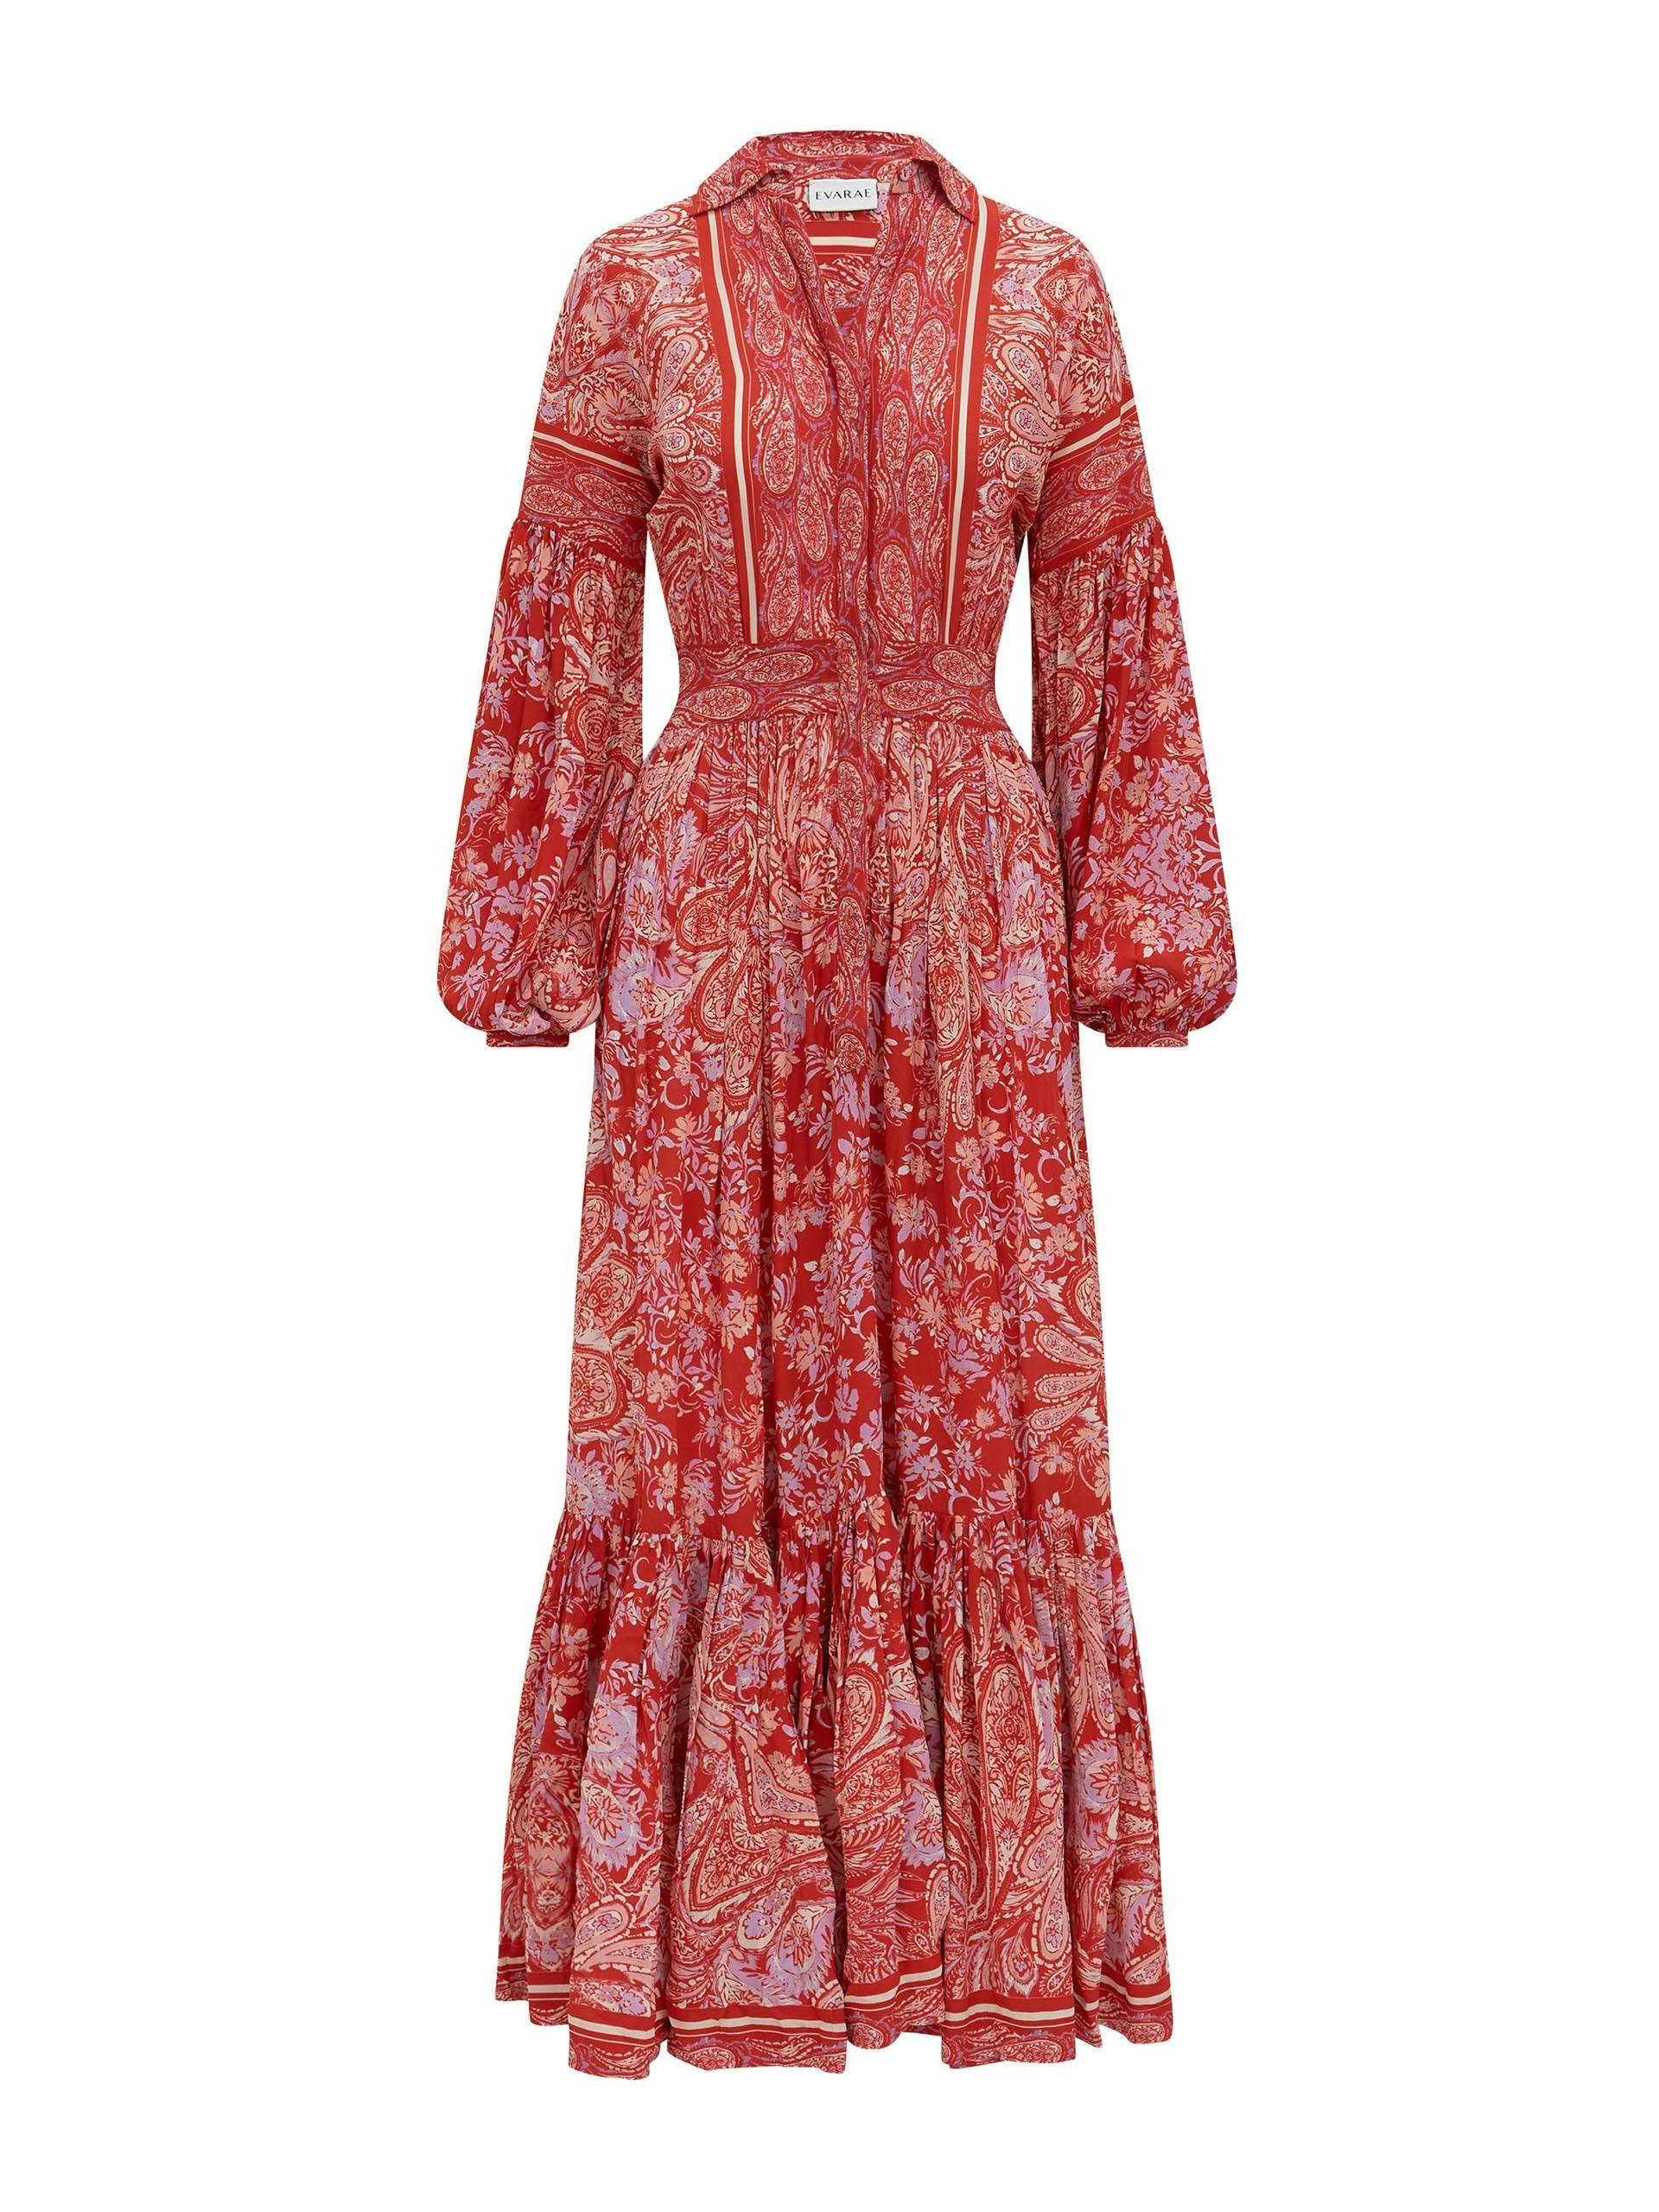 Red paisley Sienna dress in Crepe de Chine